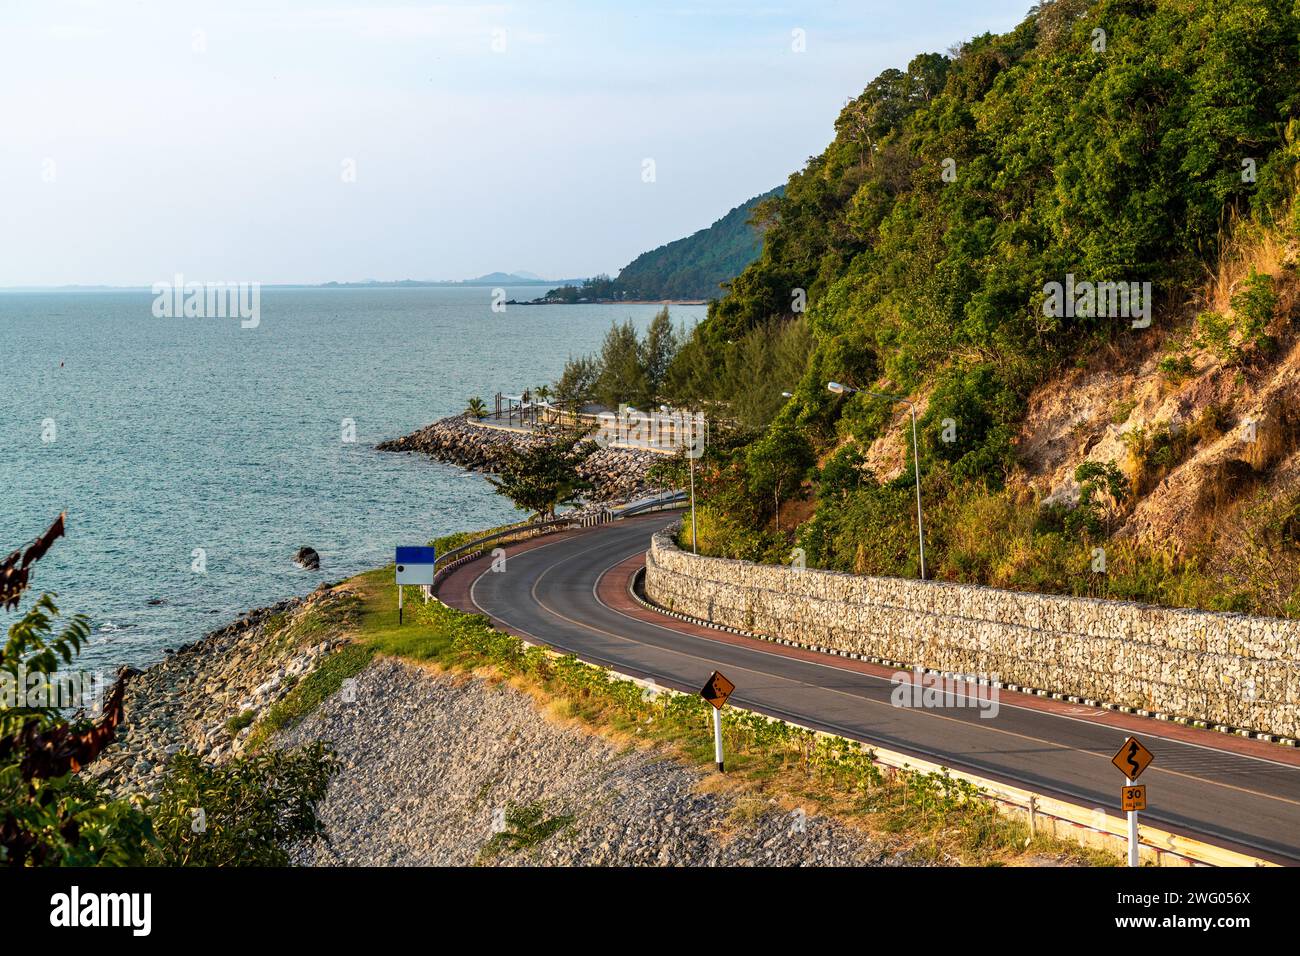 Beautiful view of evening sunset at the Noen Nangphaya view point looking out to the ocean and winding road along the coast in Chonburi, Thailand Stock Photo